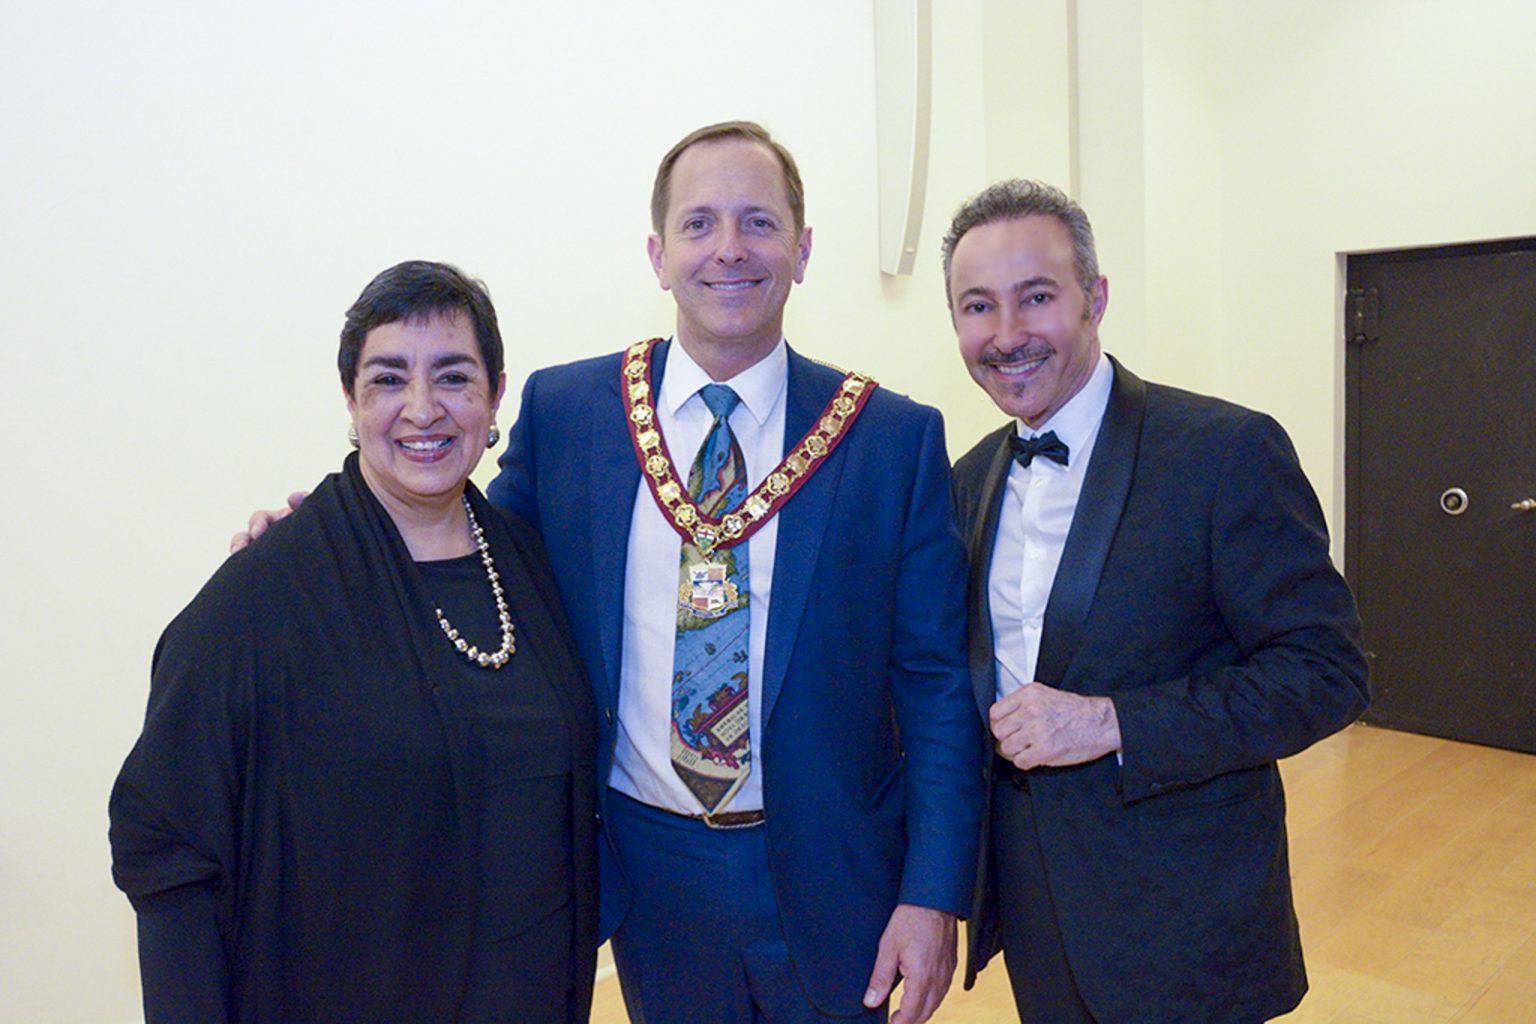 The Patron of the Water for Life, International Art Exhibition, First Edition, the Mayor of Niagara Falls, Jim Diodati, wih Angelina Herrera and Antoine Gaber during the opening.